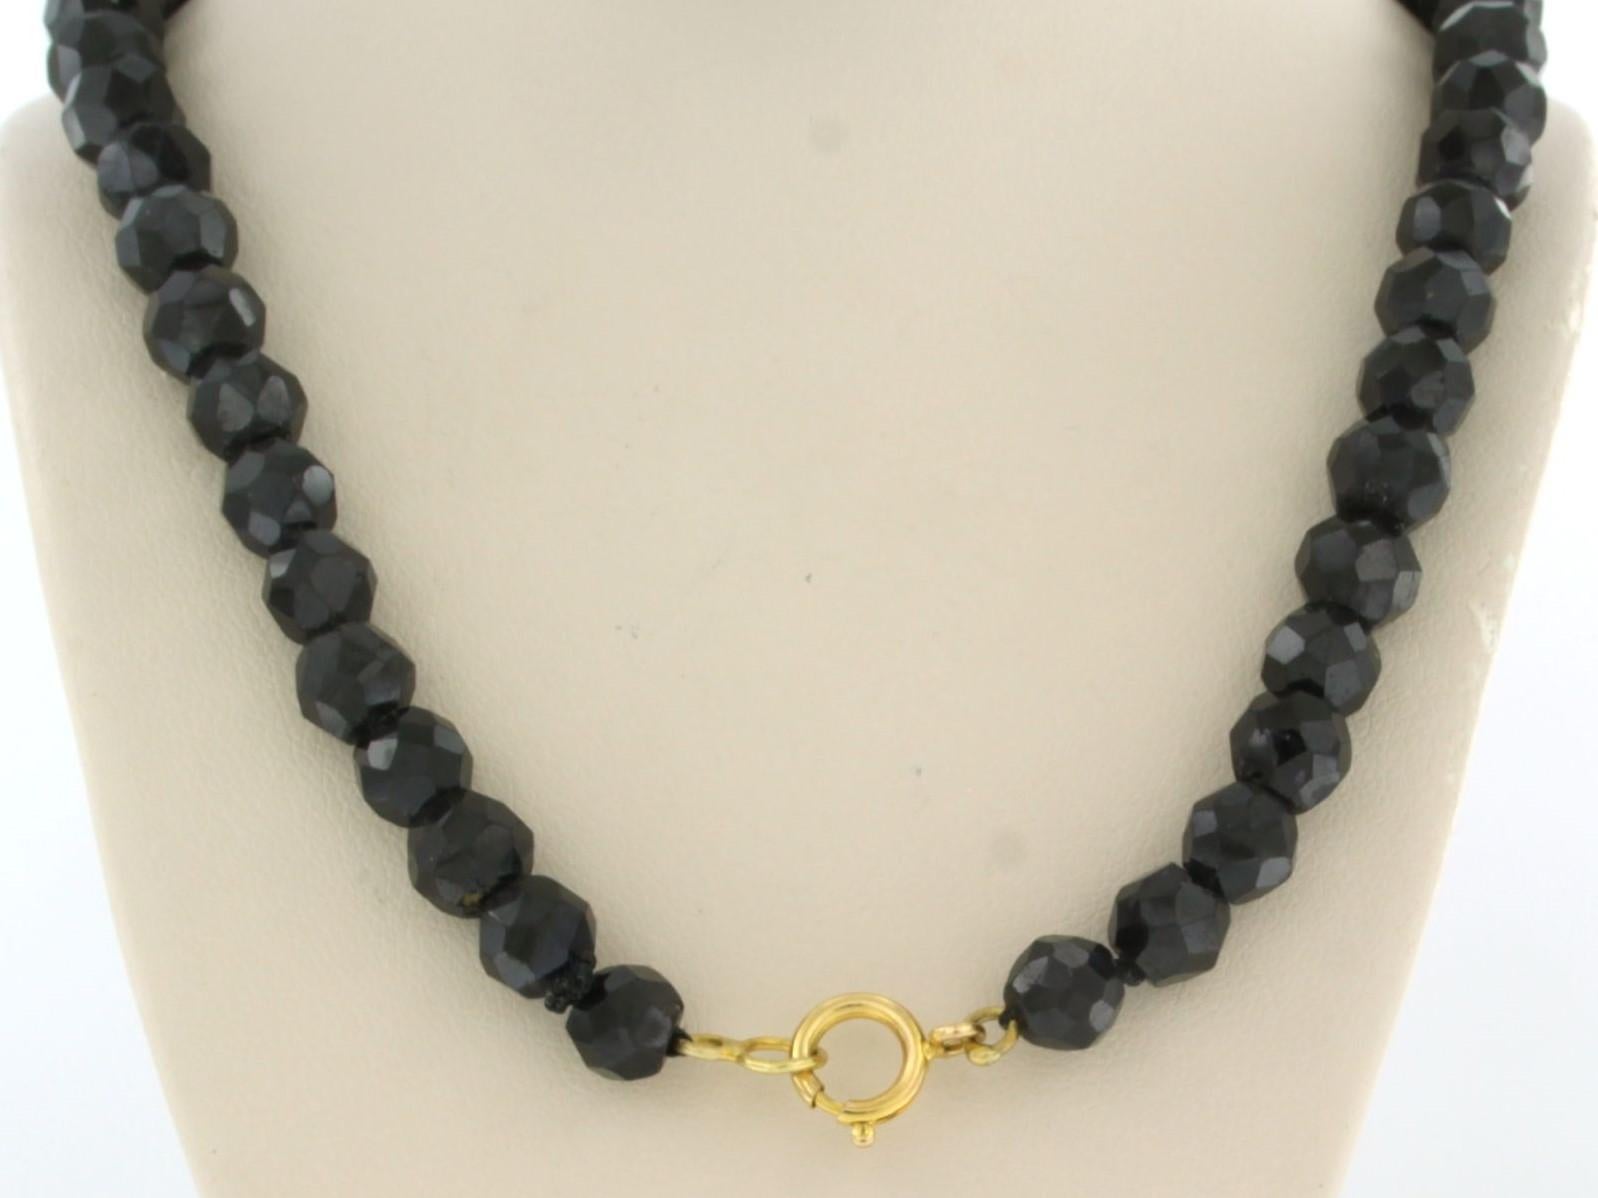 14k gold clasp and garnet bead necklace with gold center piece - 44 cm long For Sale 1